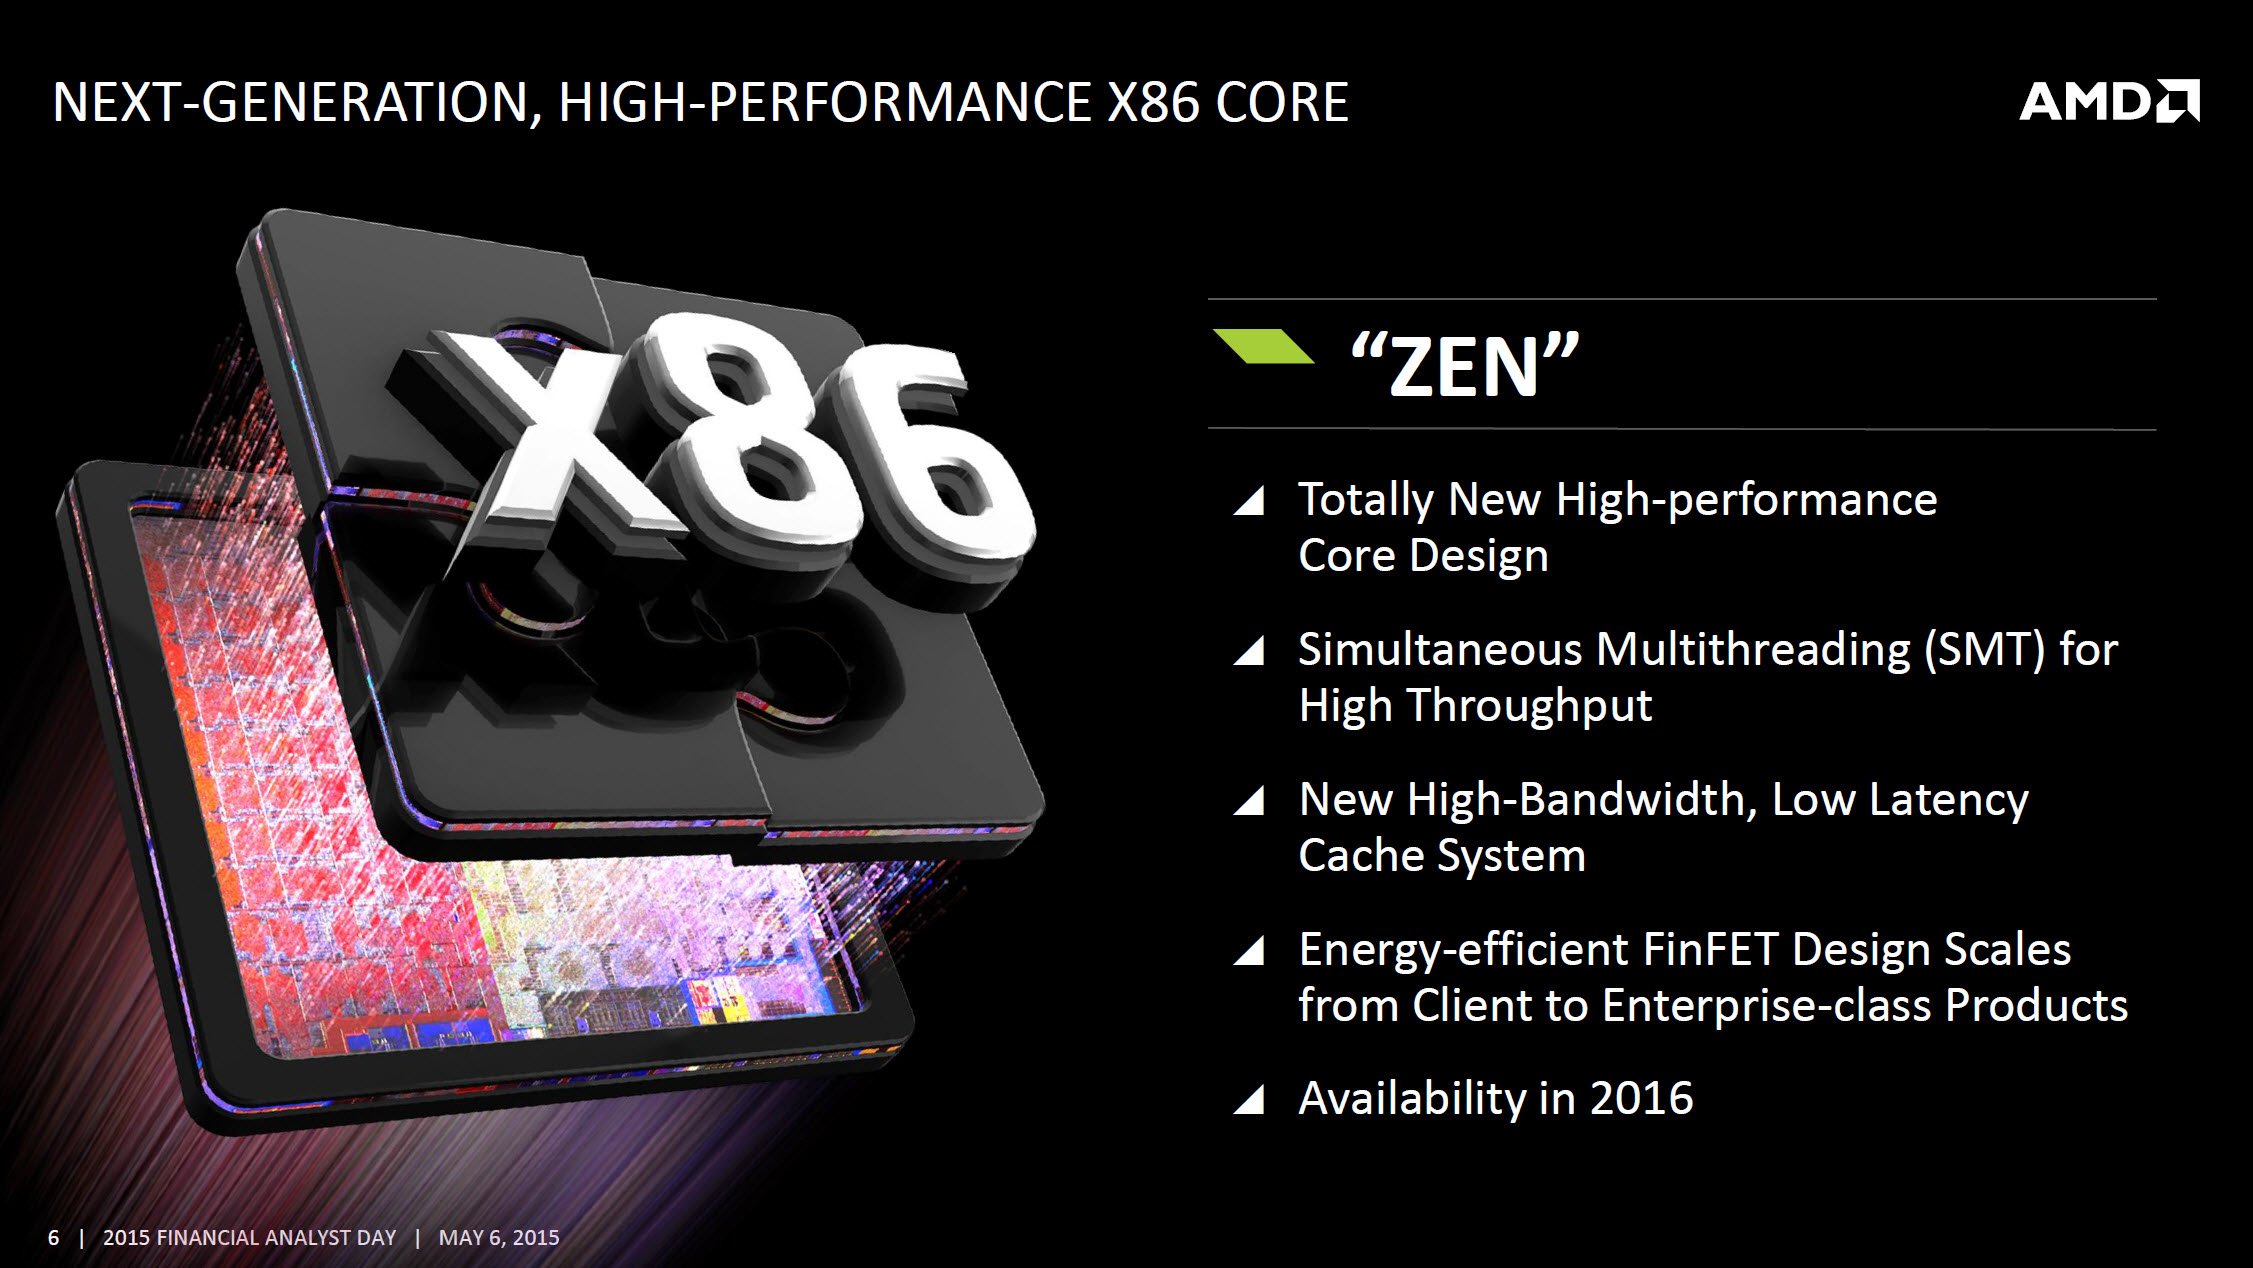 AMD Zen Will Compete Favorably with Intel